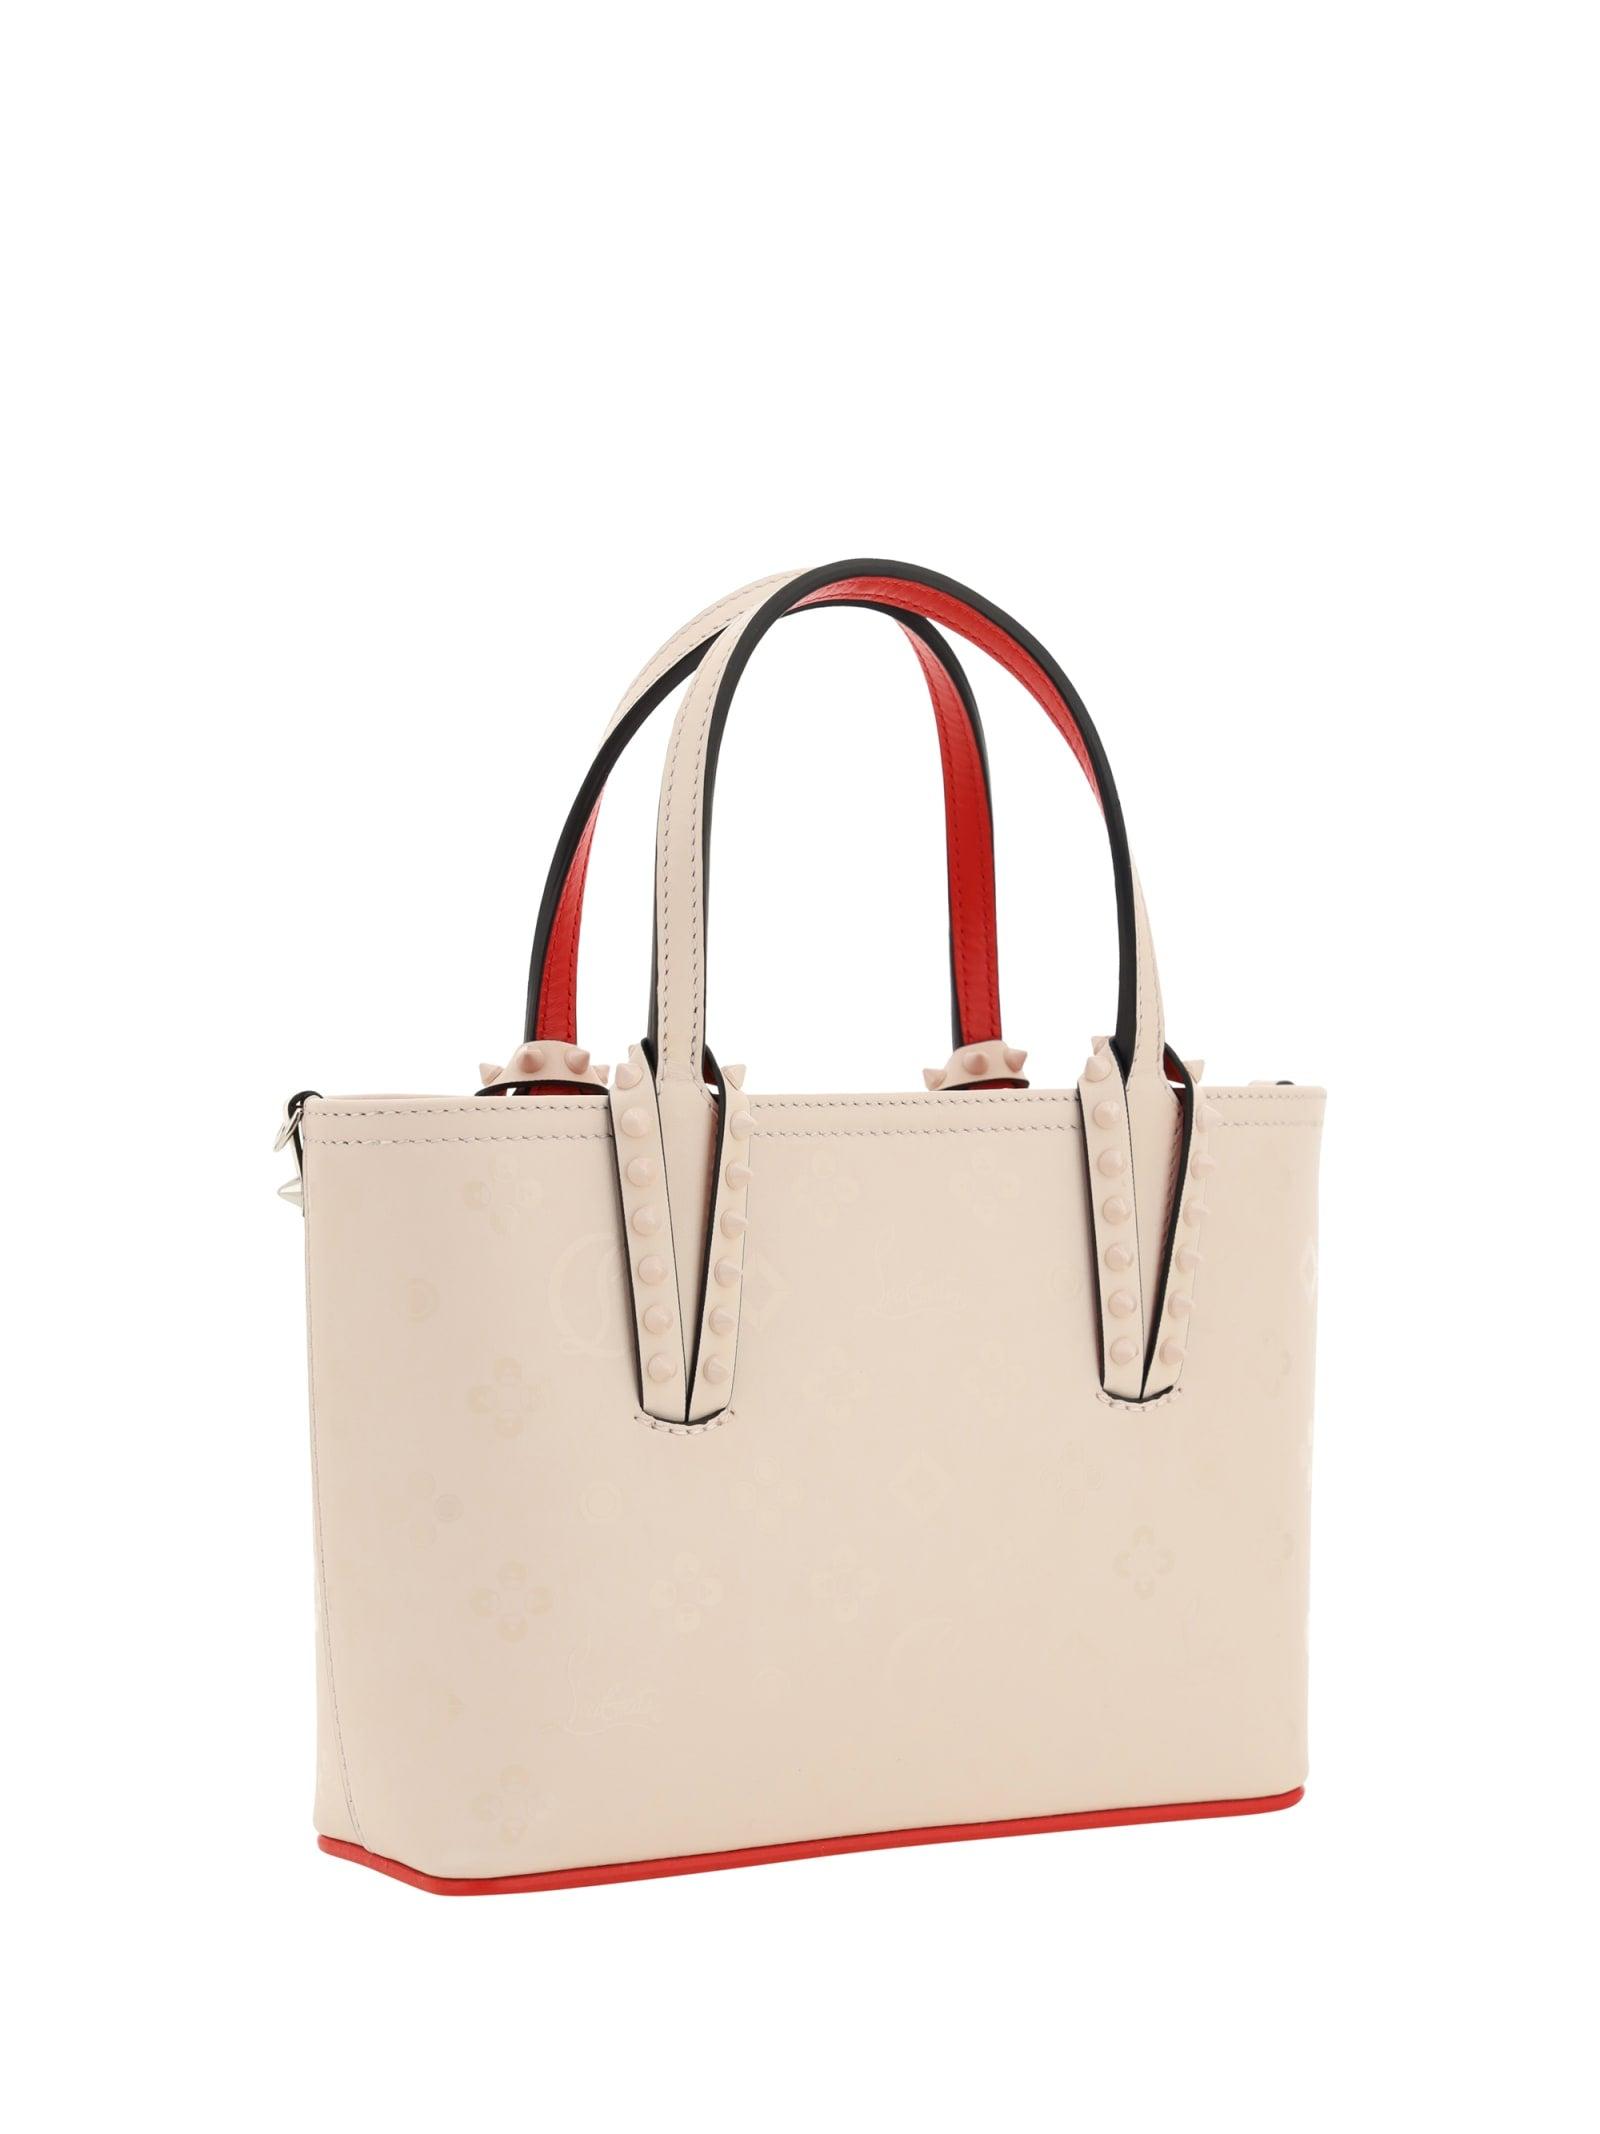 Cabata Nano Patent Leather Tote Bag in Pink - Christian Louboutin